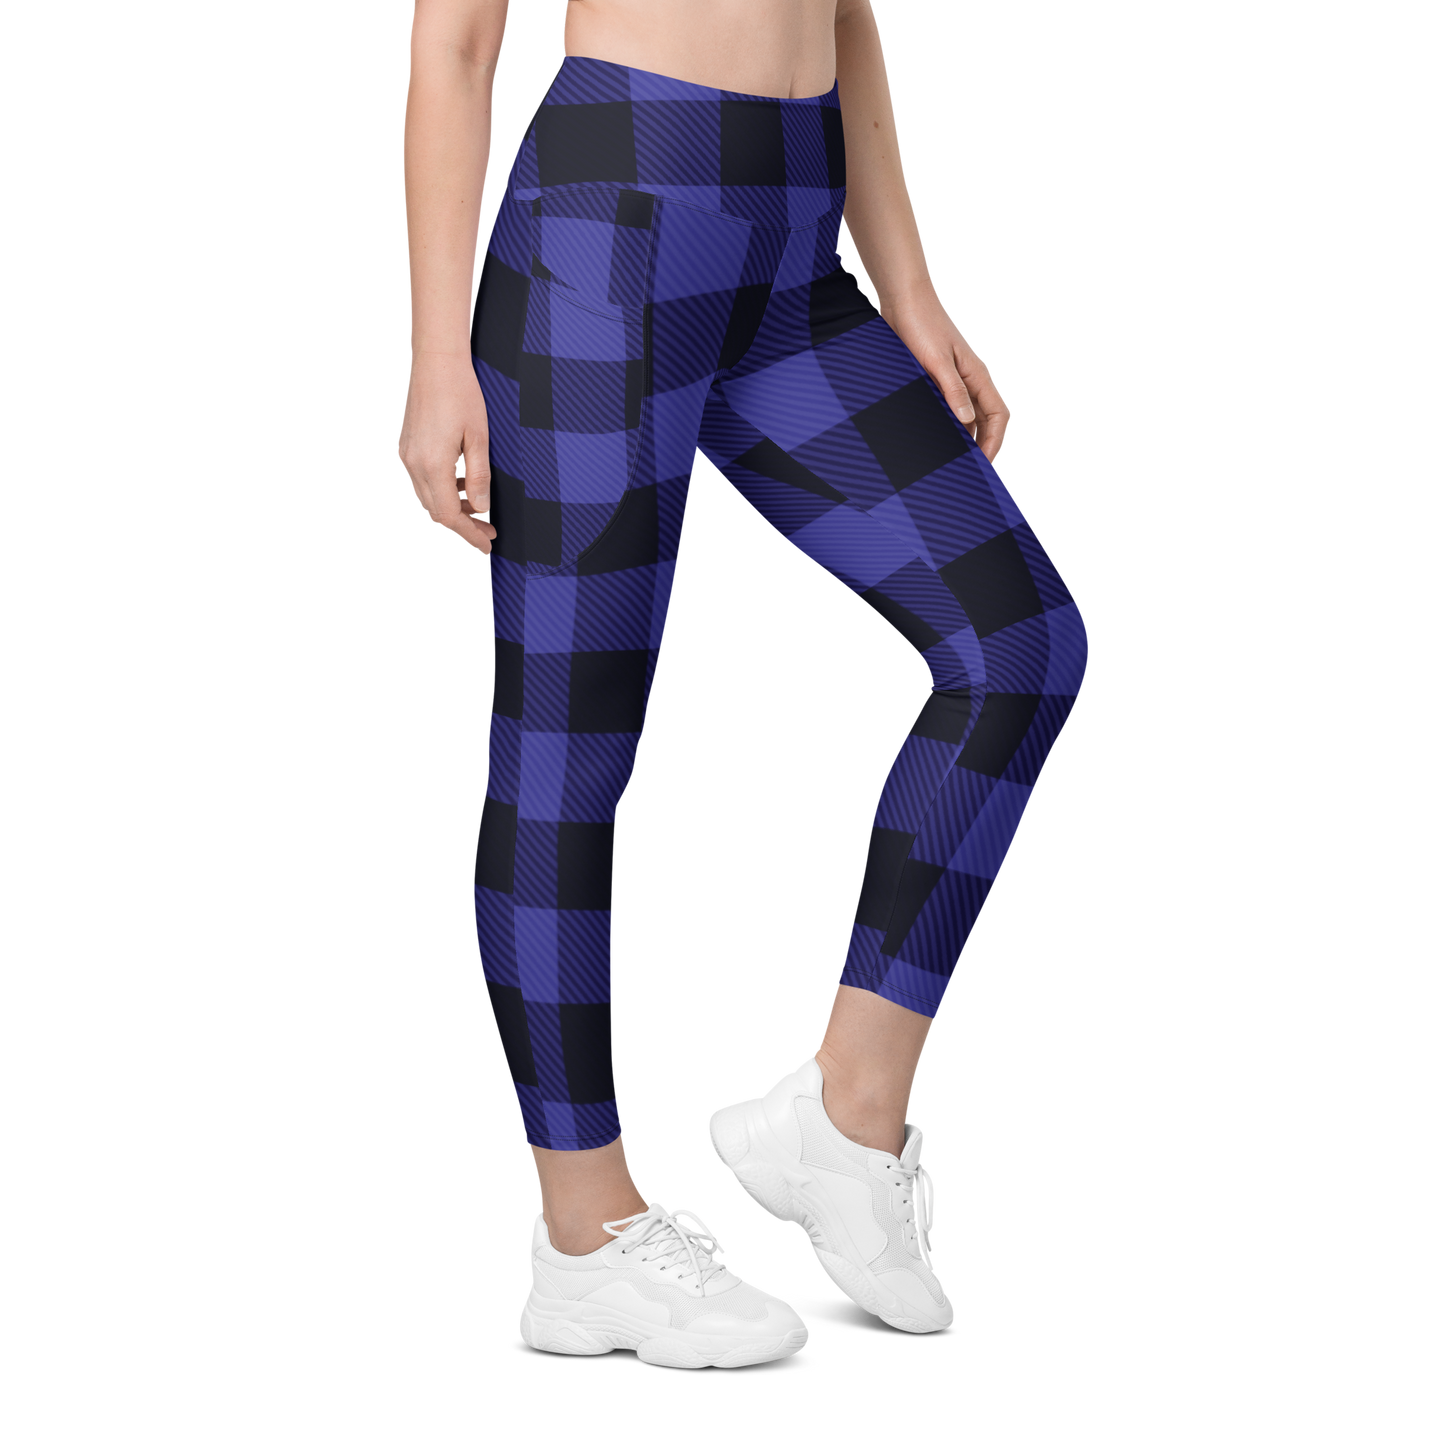 Leggings with pockets in blue & black plaid - familiar...yet different